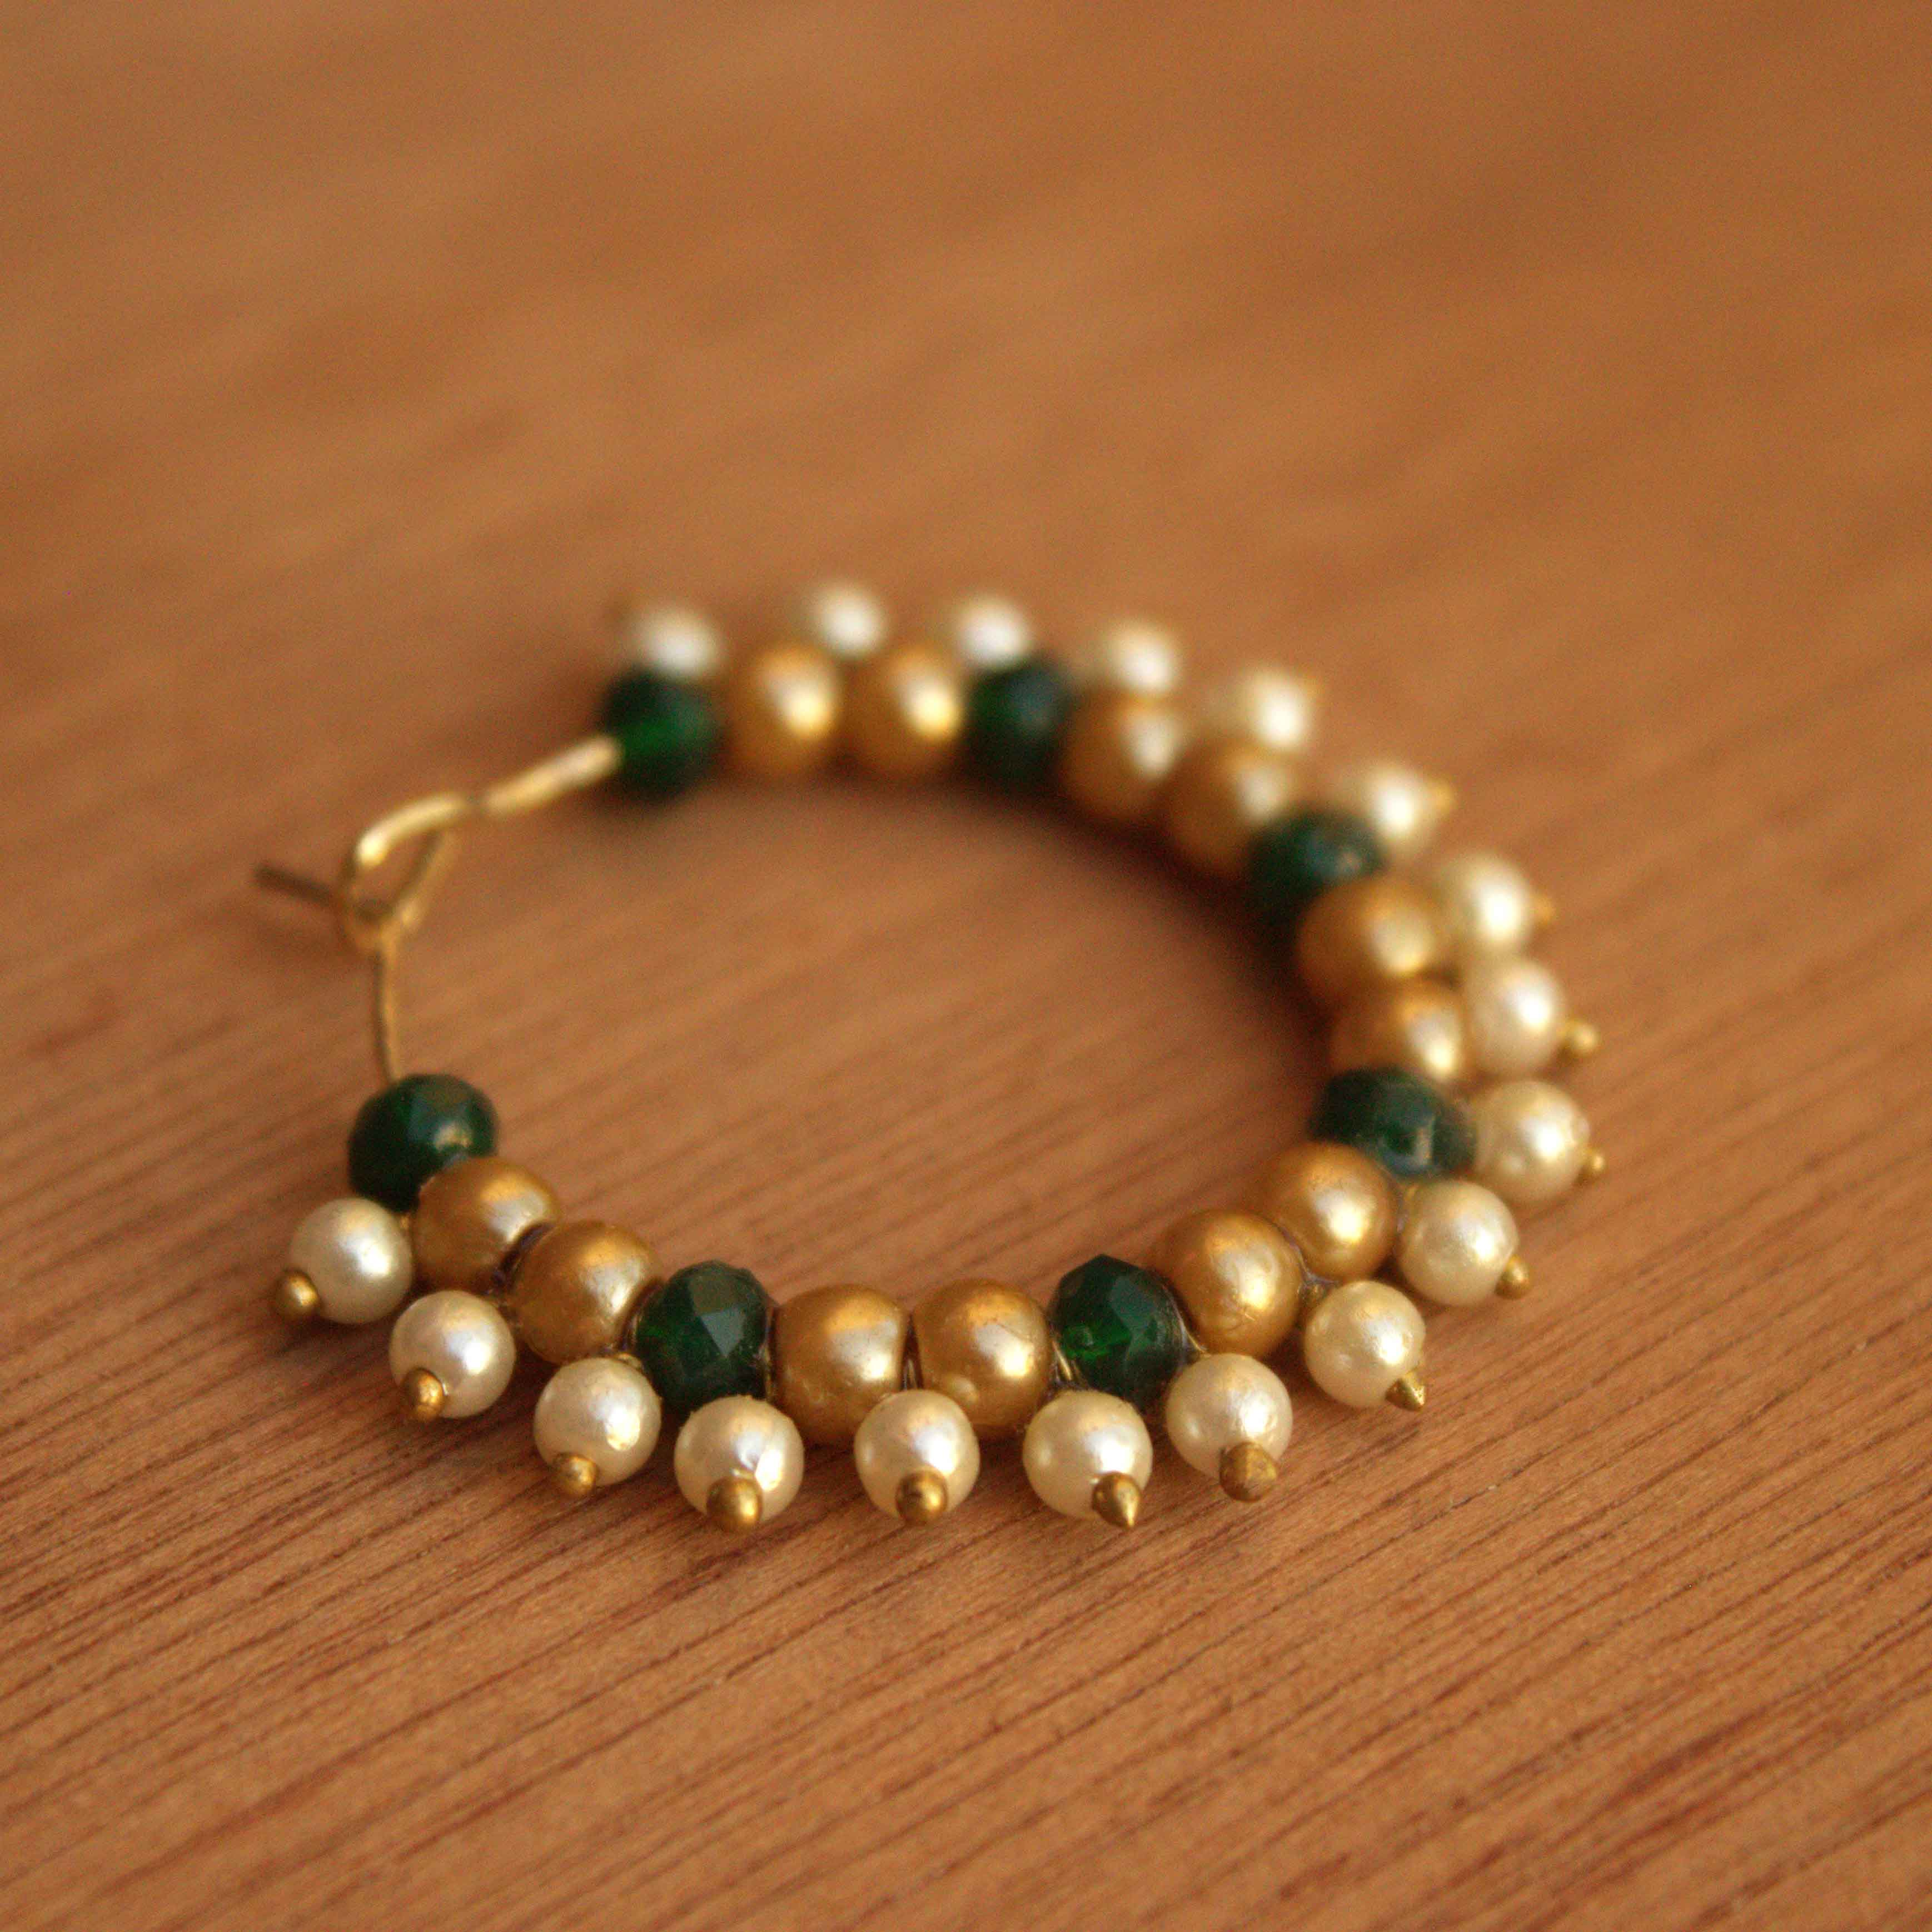 Gorgeous Green Pearl Nose Ring By BeAbhika